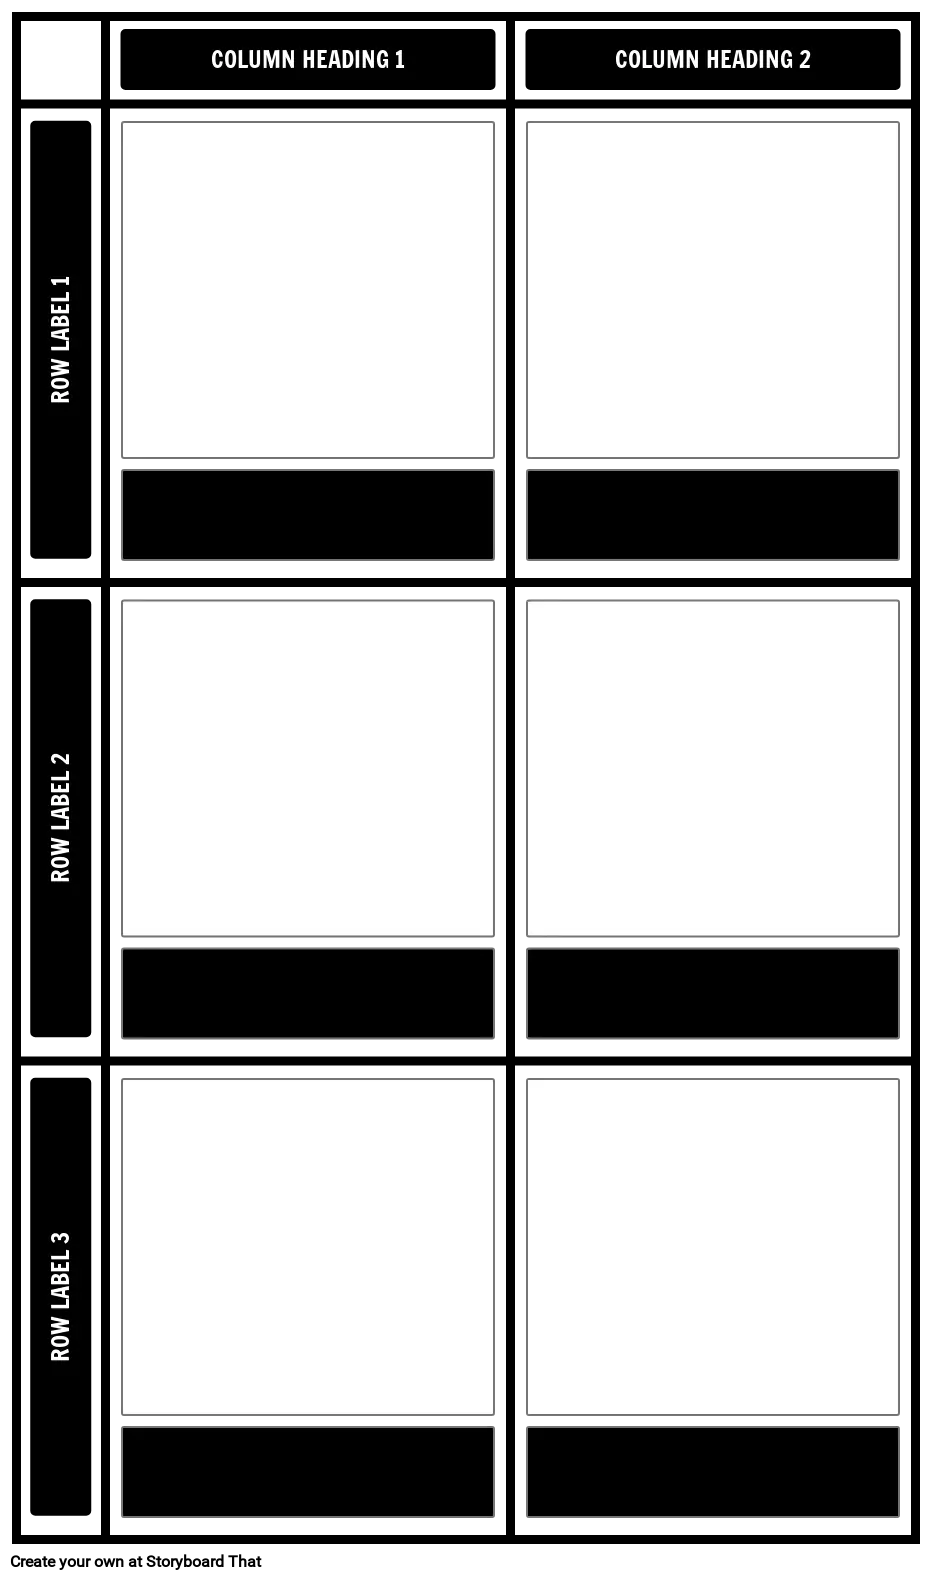 3 Rows by 2 Columns Storyboard Chart with Titles and Descriptions